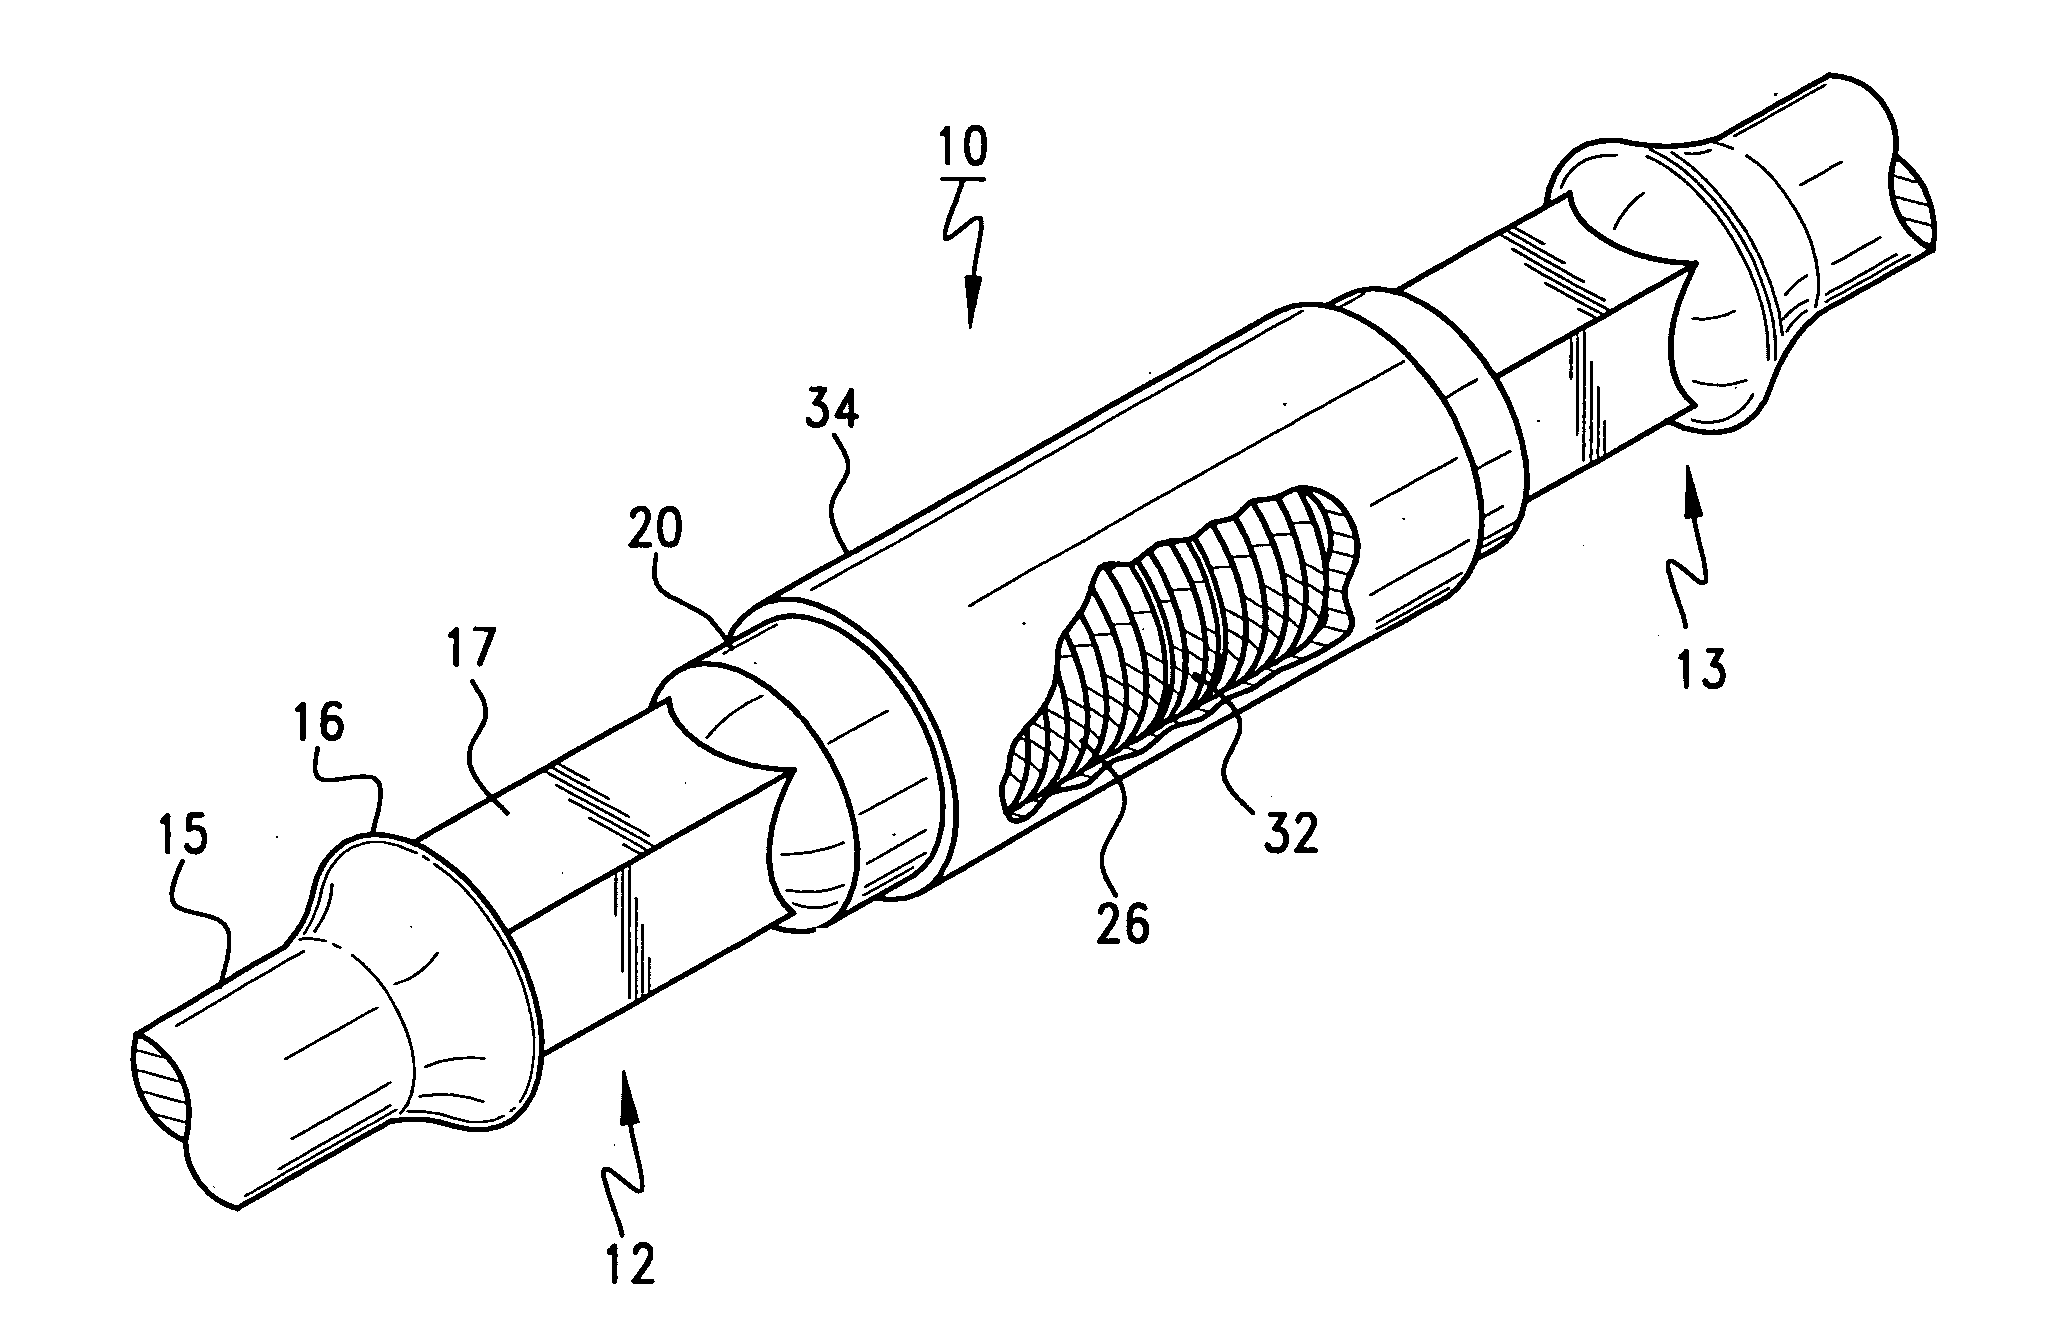 Connectable rod system for driving downhole pumps for oil field installations